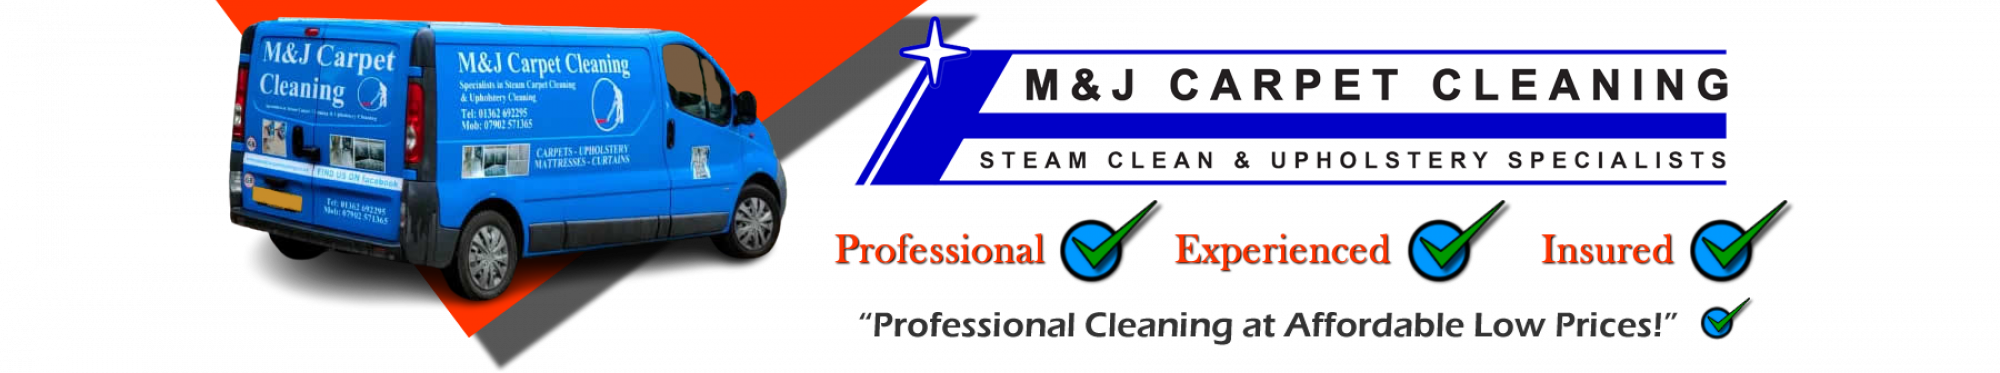 Welcome to M & J Carpet Cleaning